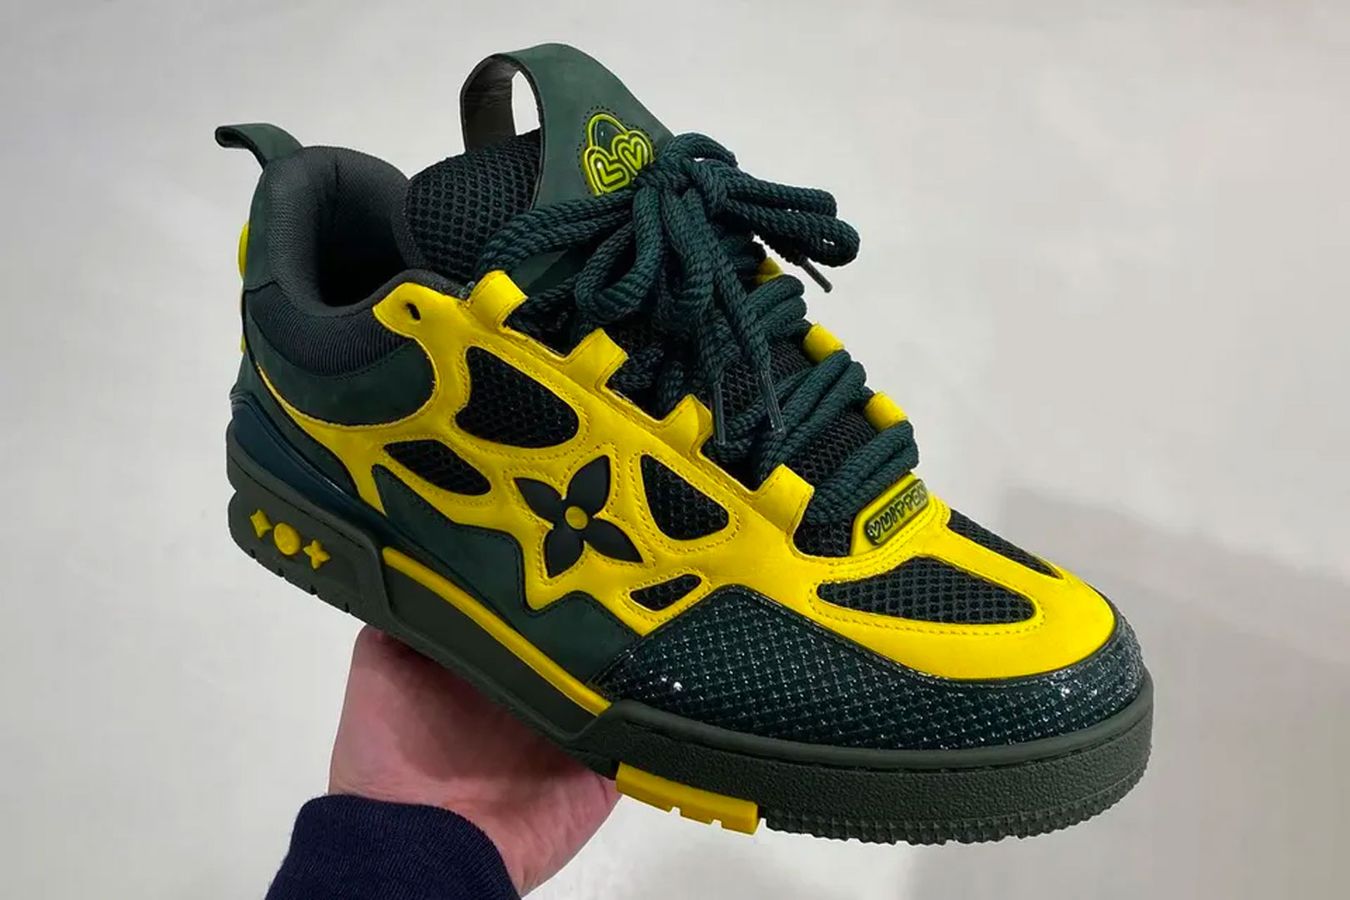 Louis Vuitton LVSK8 product image of a green and yellow low-top.